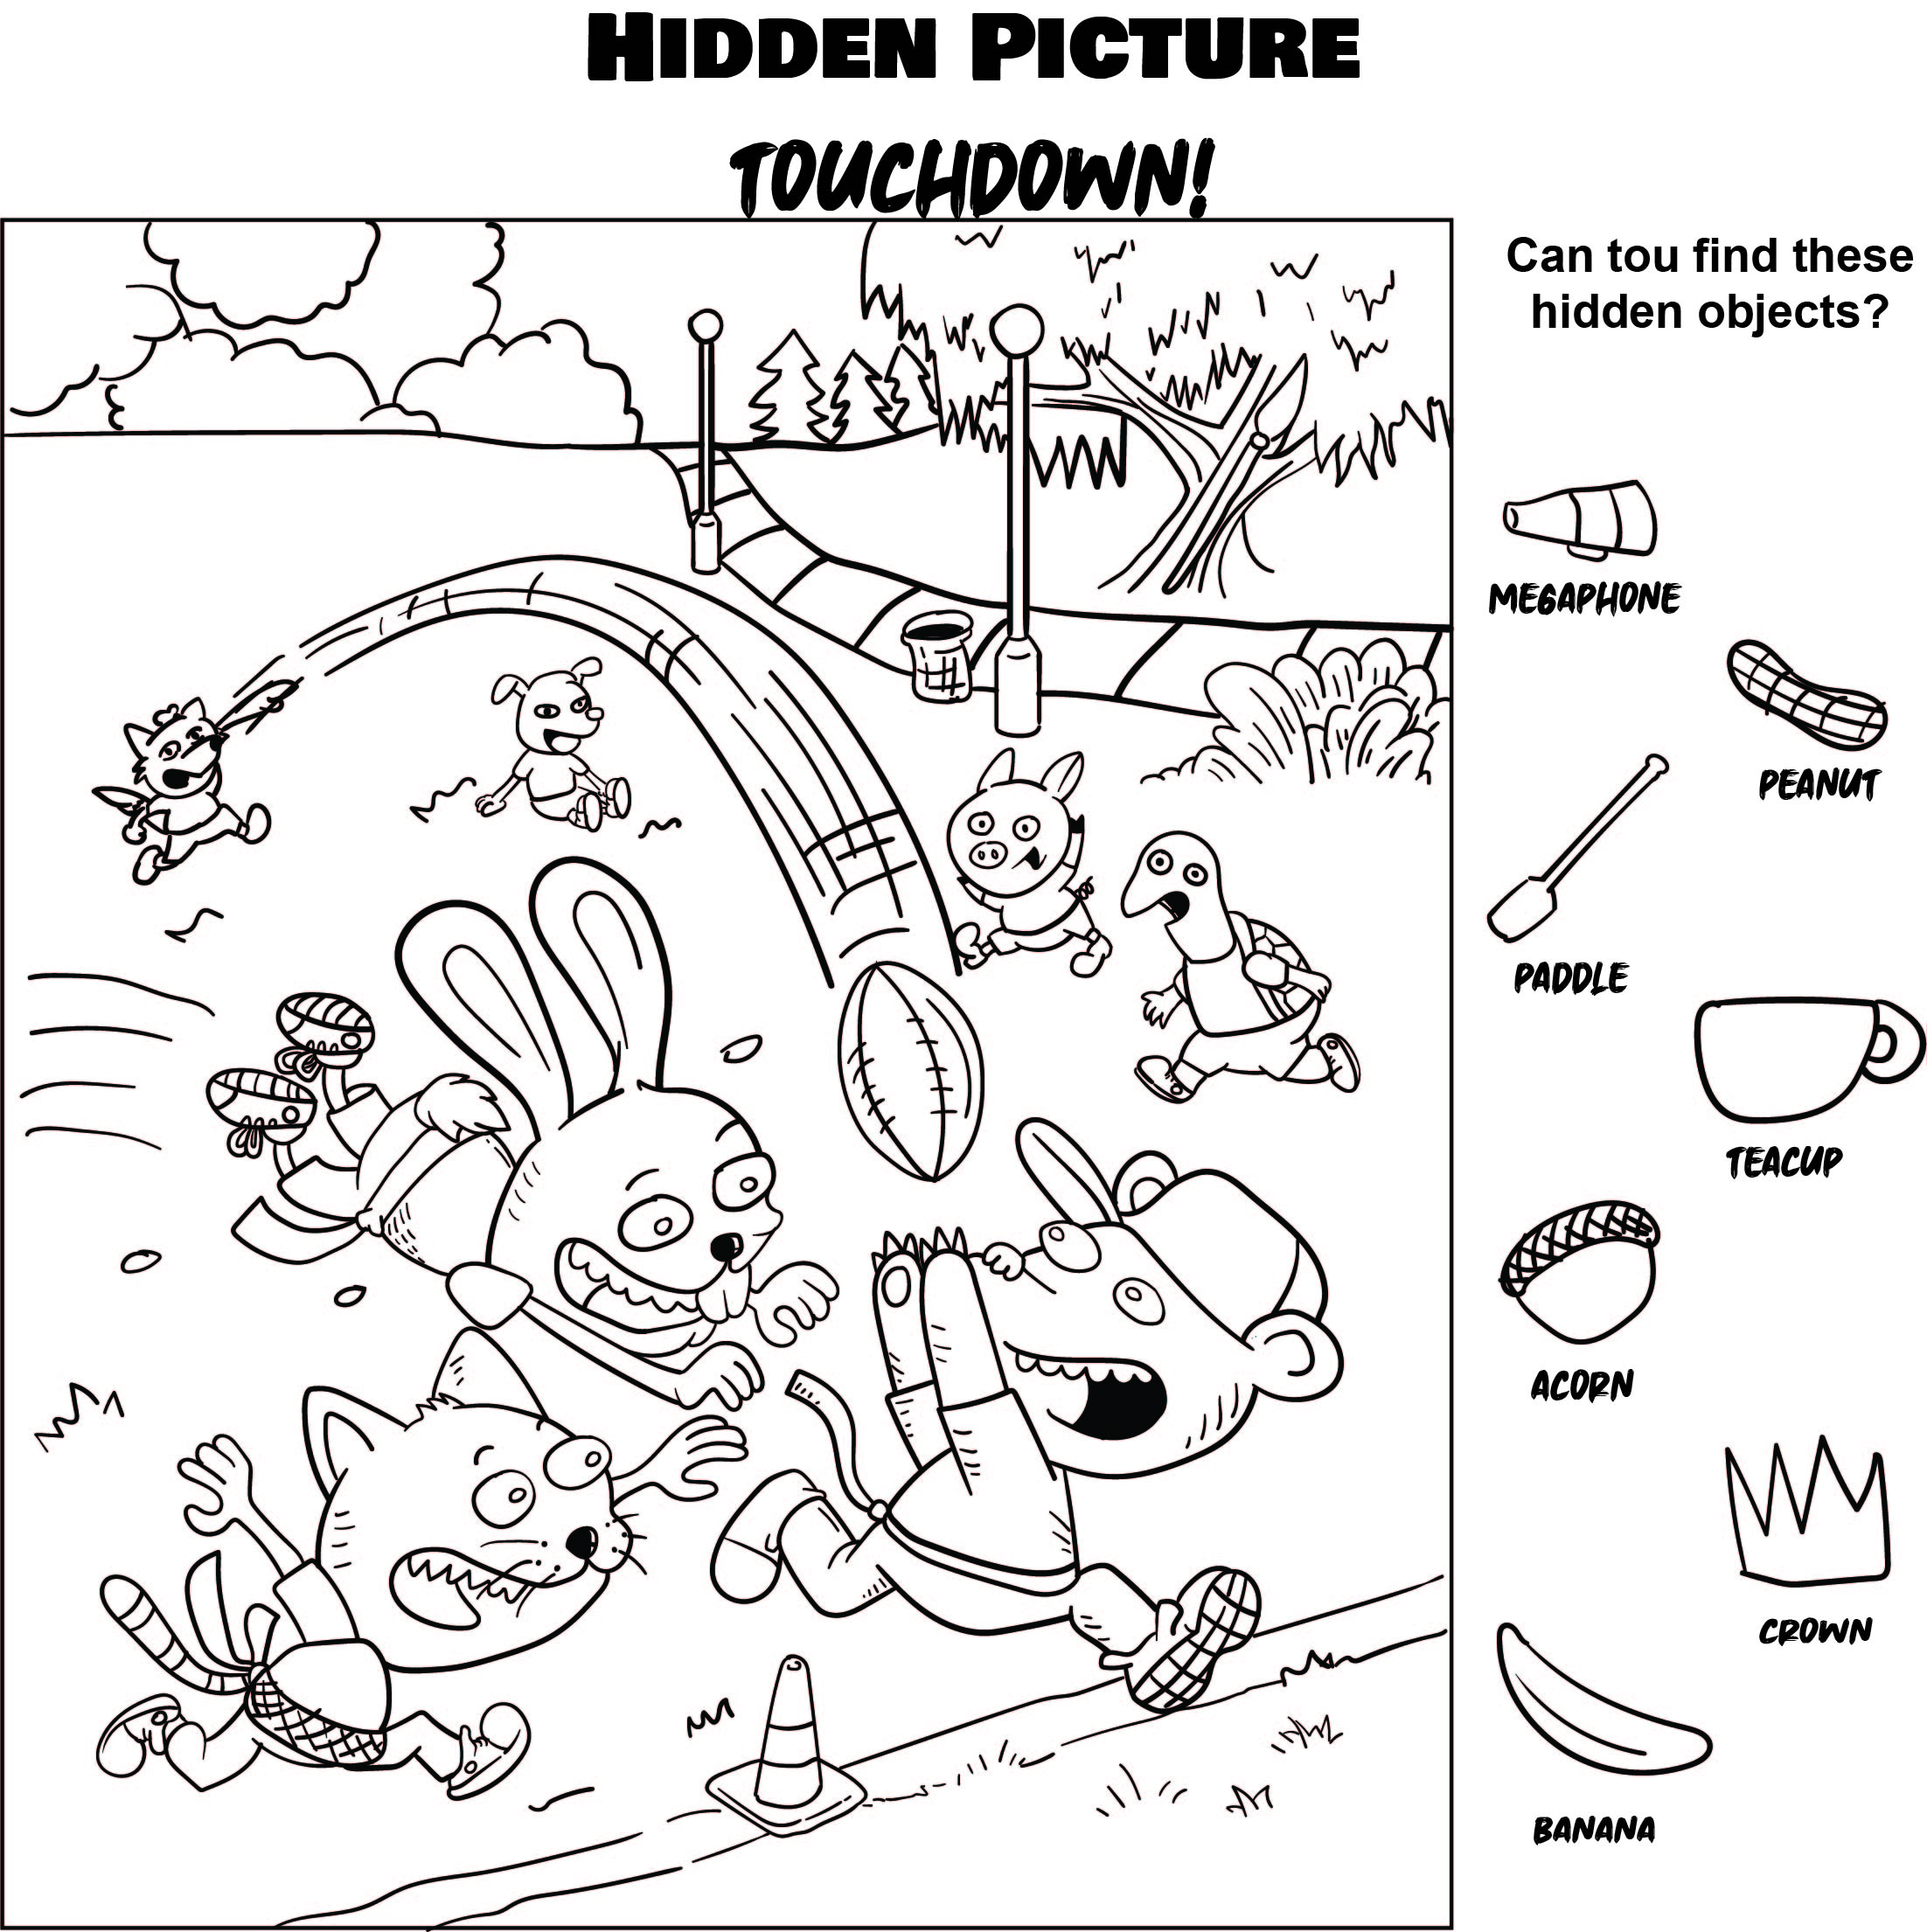 hidden-picture-touchdown-can-you-find-the-hidden-objects